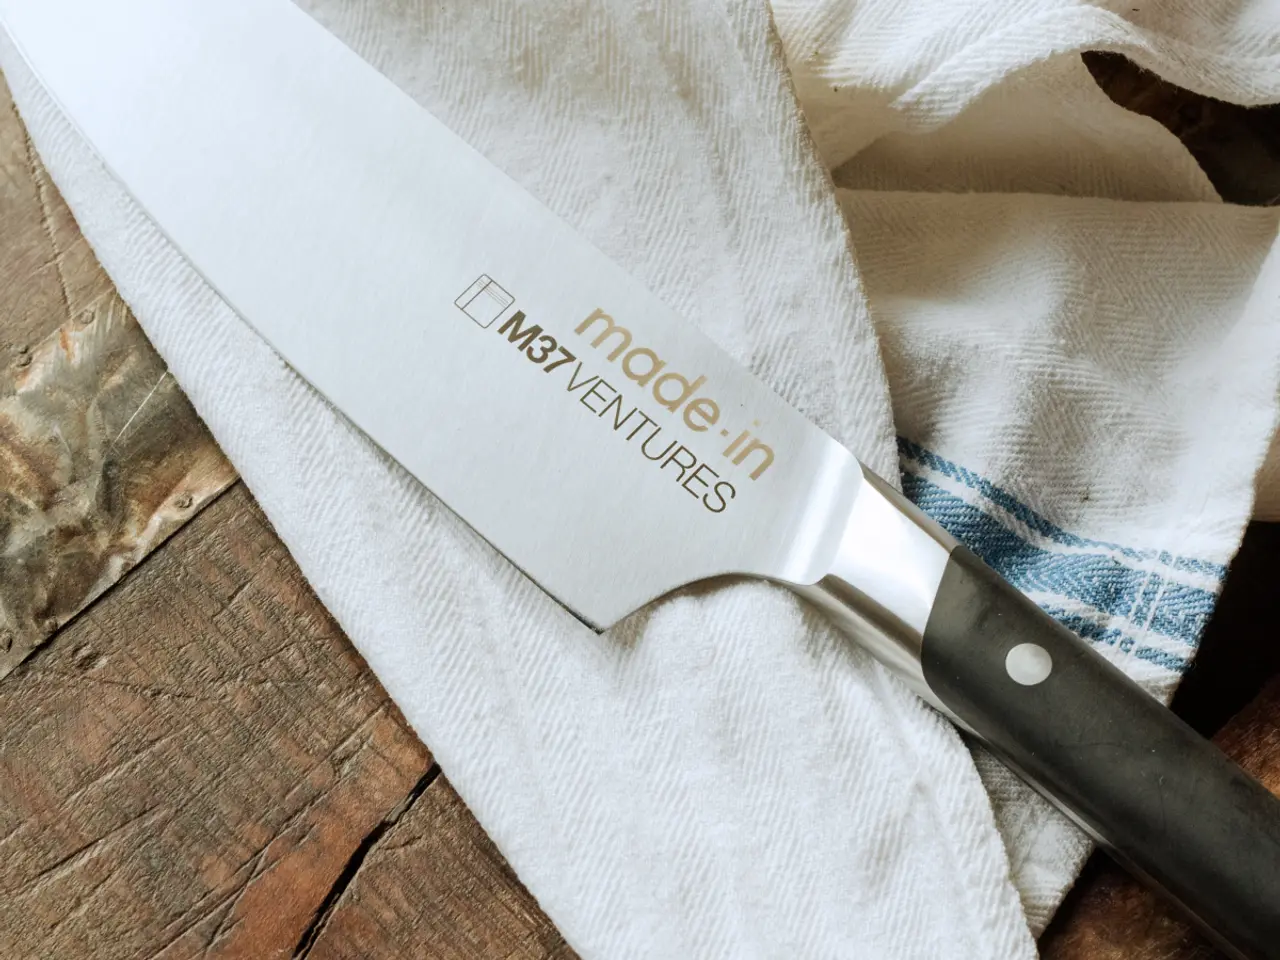 A chef's knife with the text "made in" and a logo labeled "MSV VENTURES" on the blade is placed on a rustic wooden surface partially covered with a striped cloth.